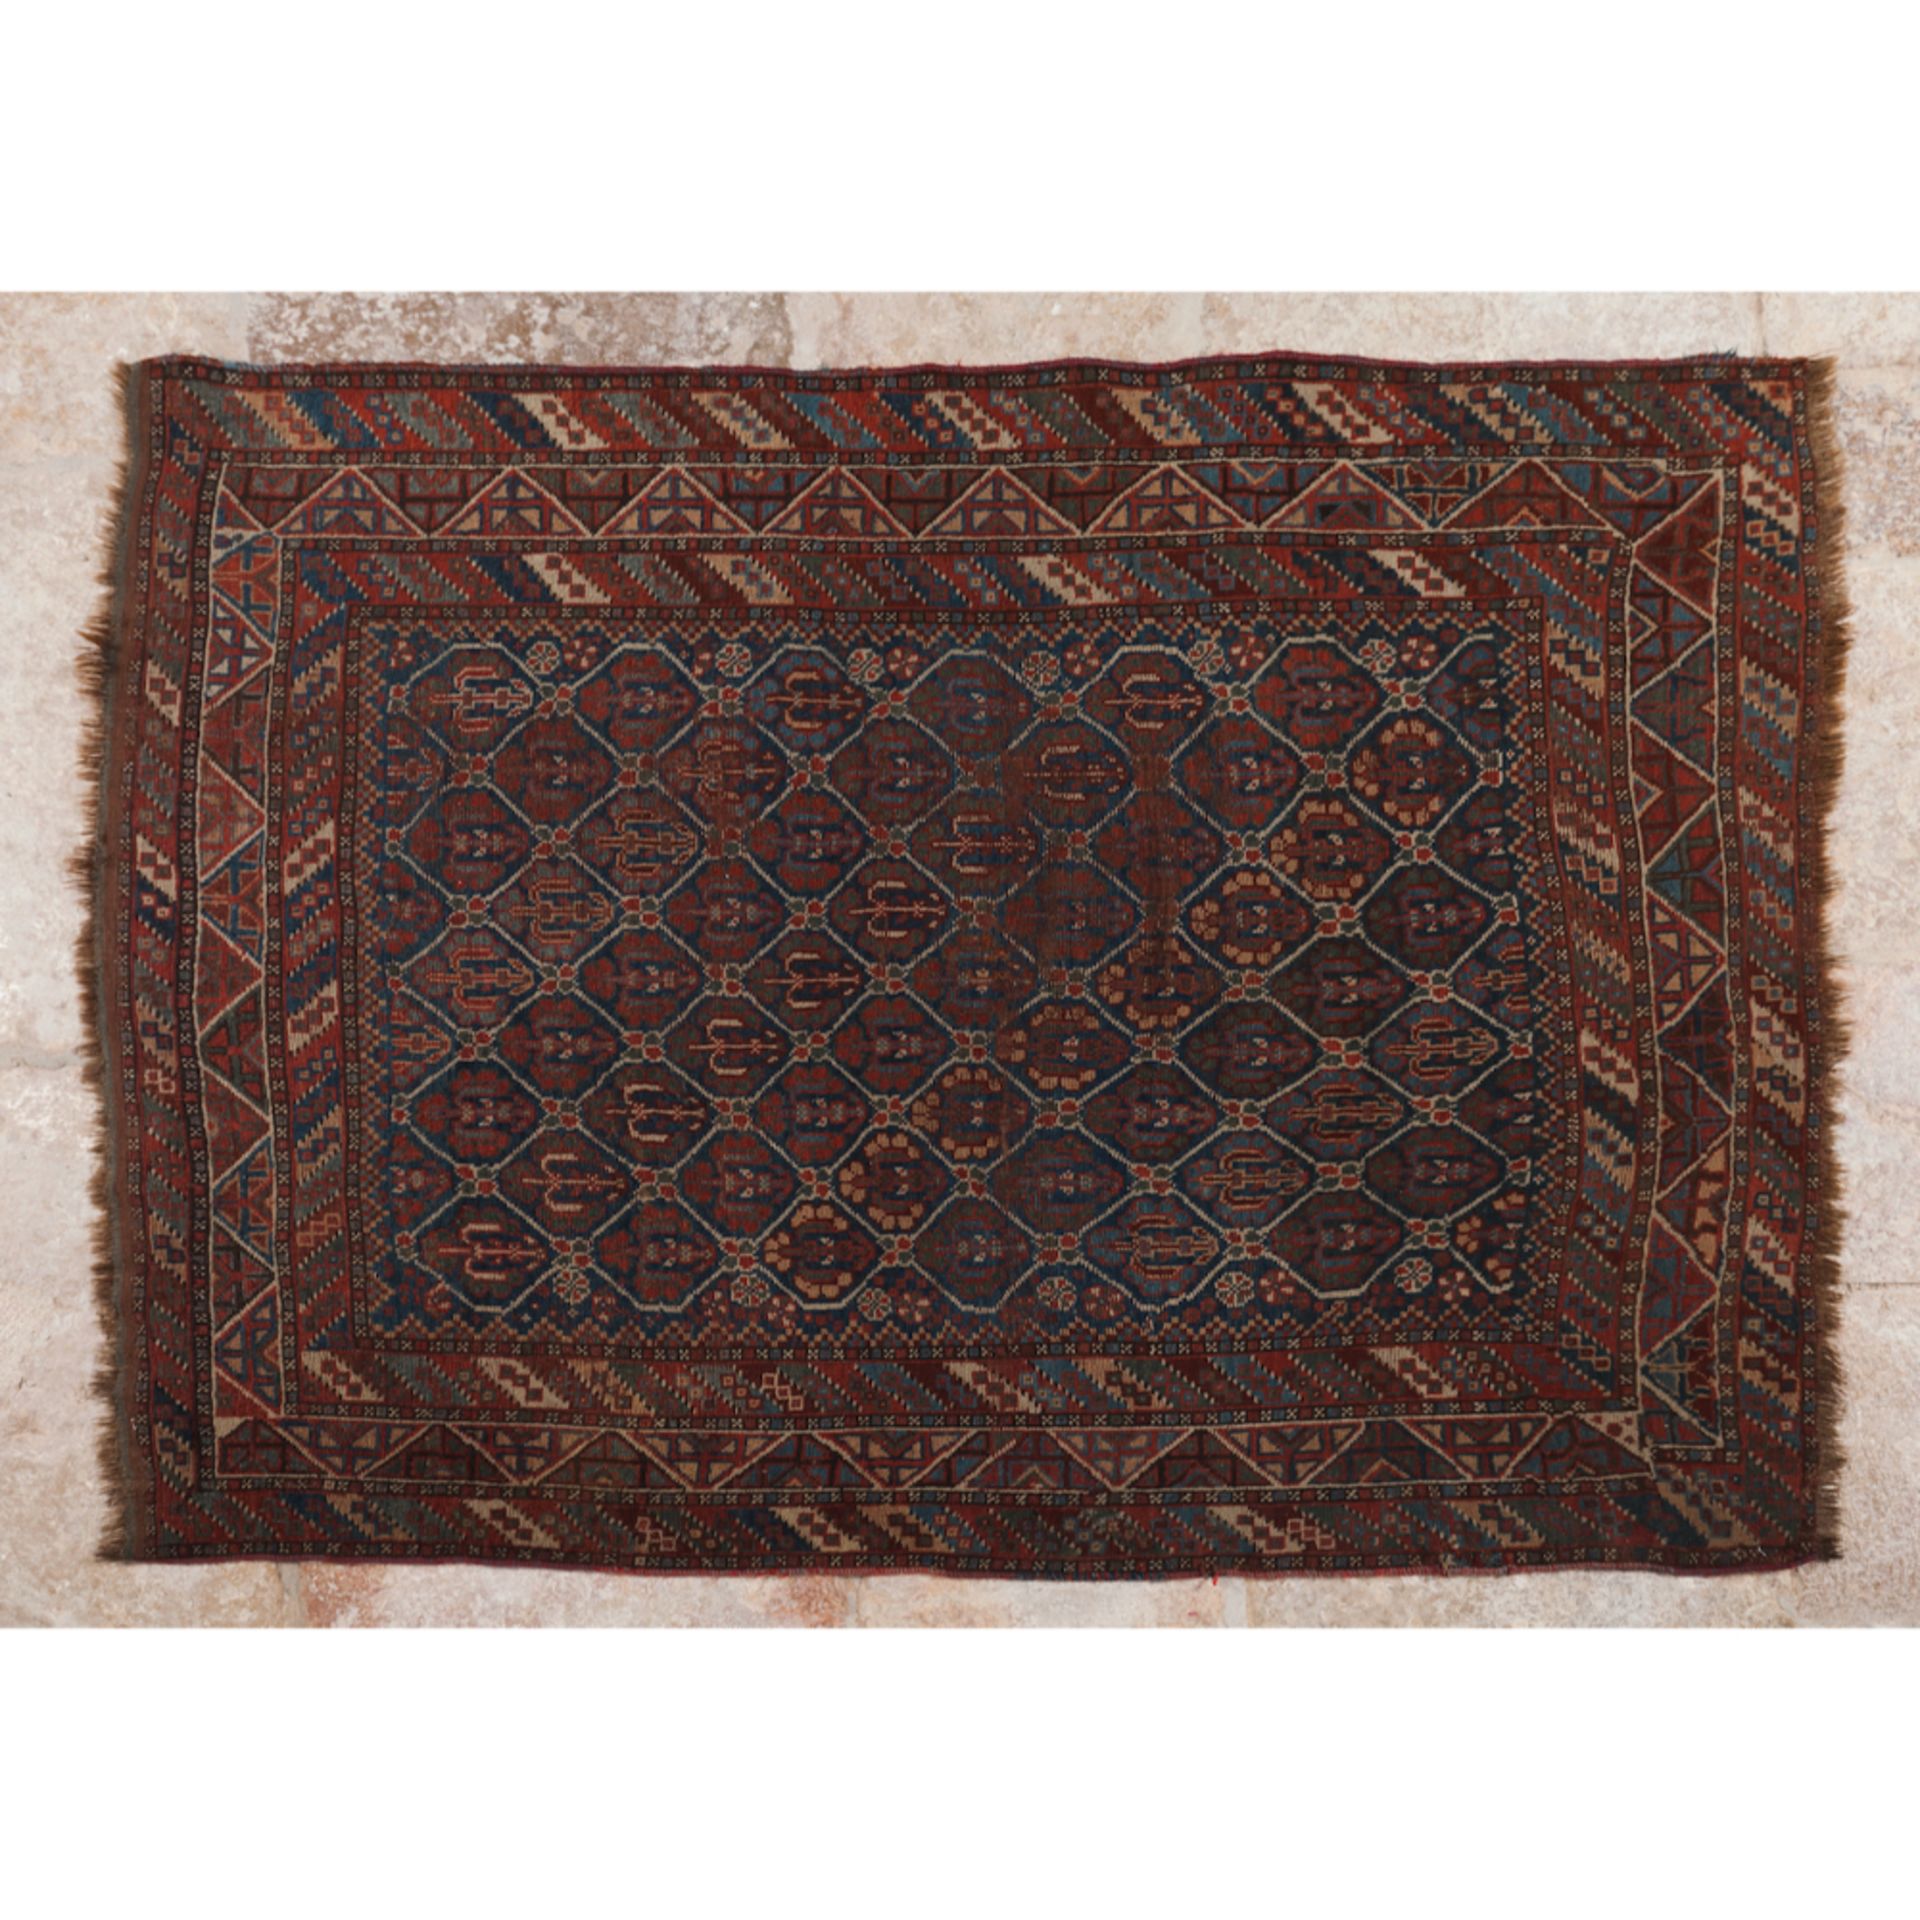 A shiraz rug, IranIn wood and cotton Floral and geometric design in shades of burgundy, beige,